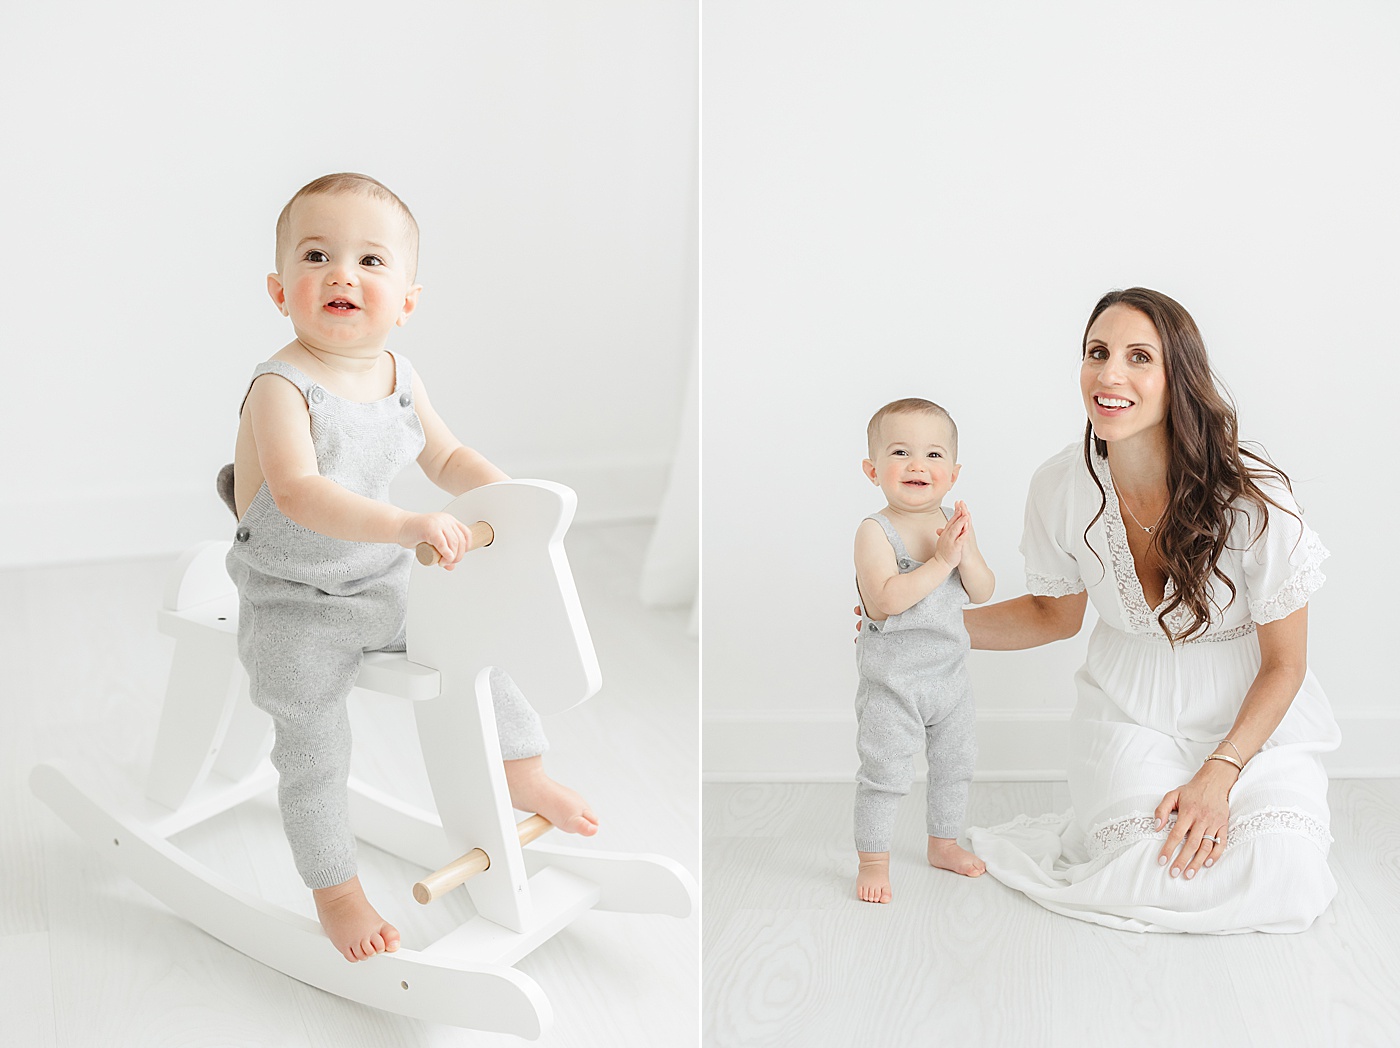 One year old boy standing with rocking horse and Mom during first birthday photoshoot with Kristin Wood Photography.